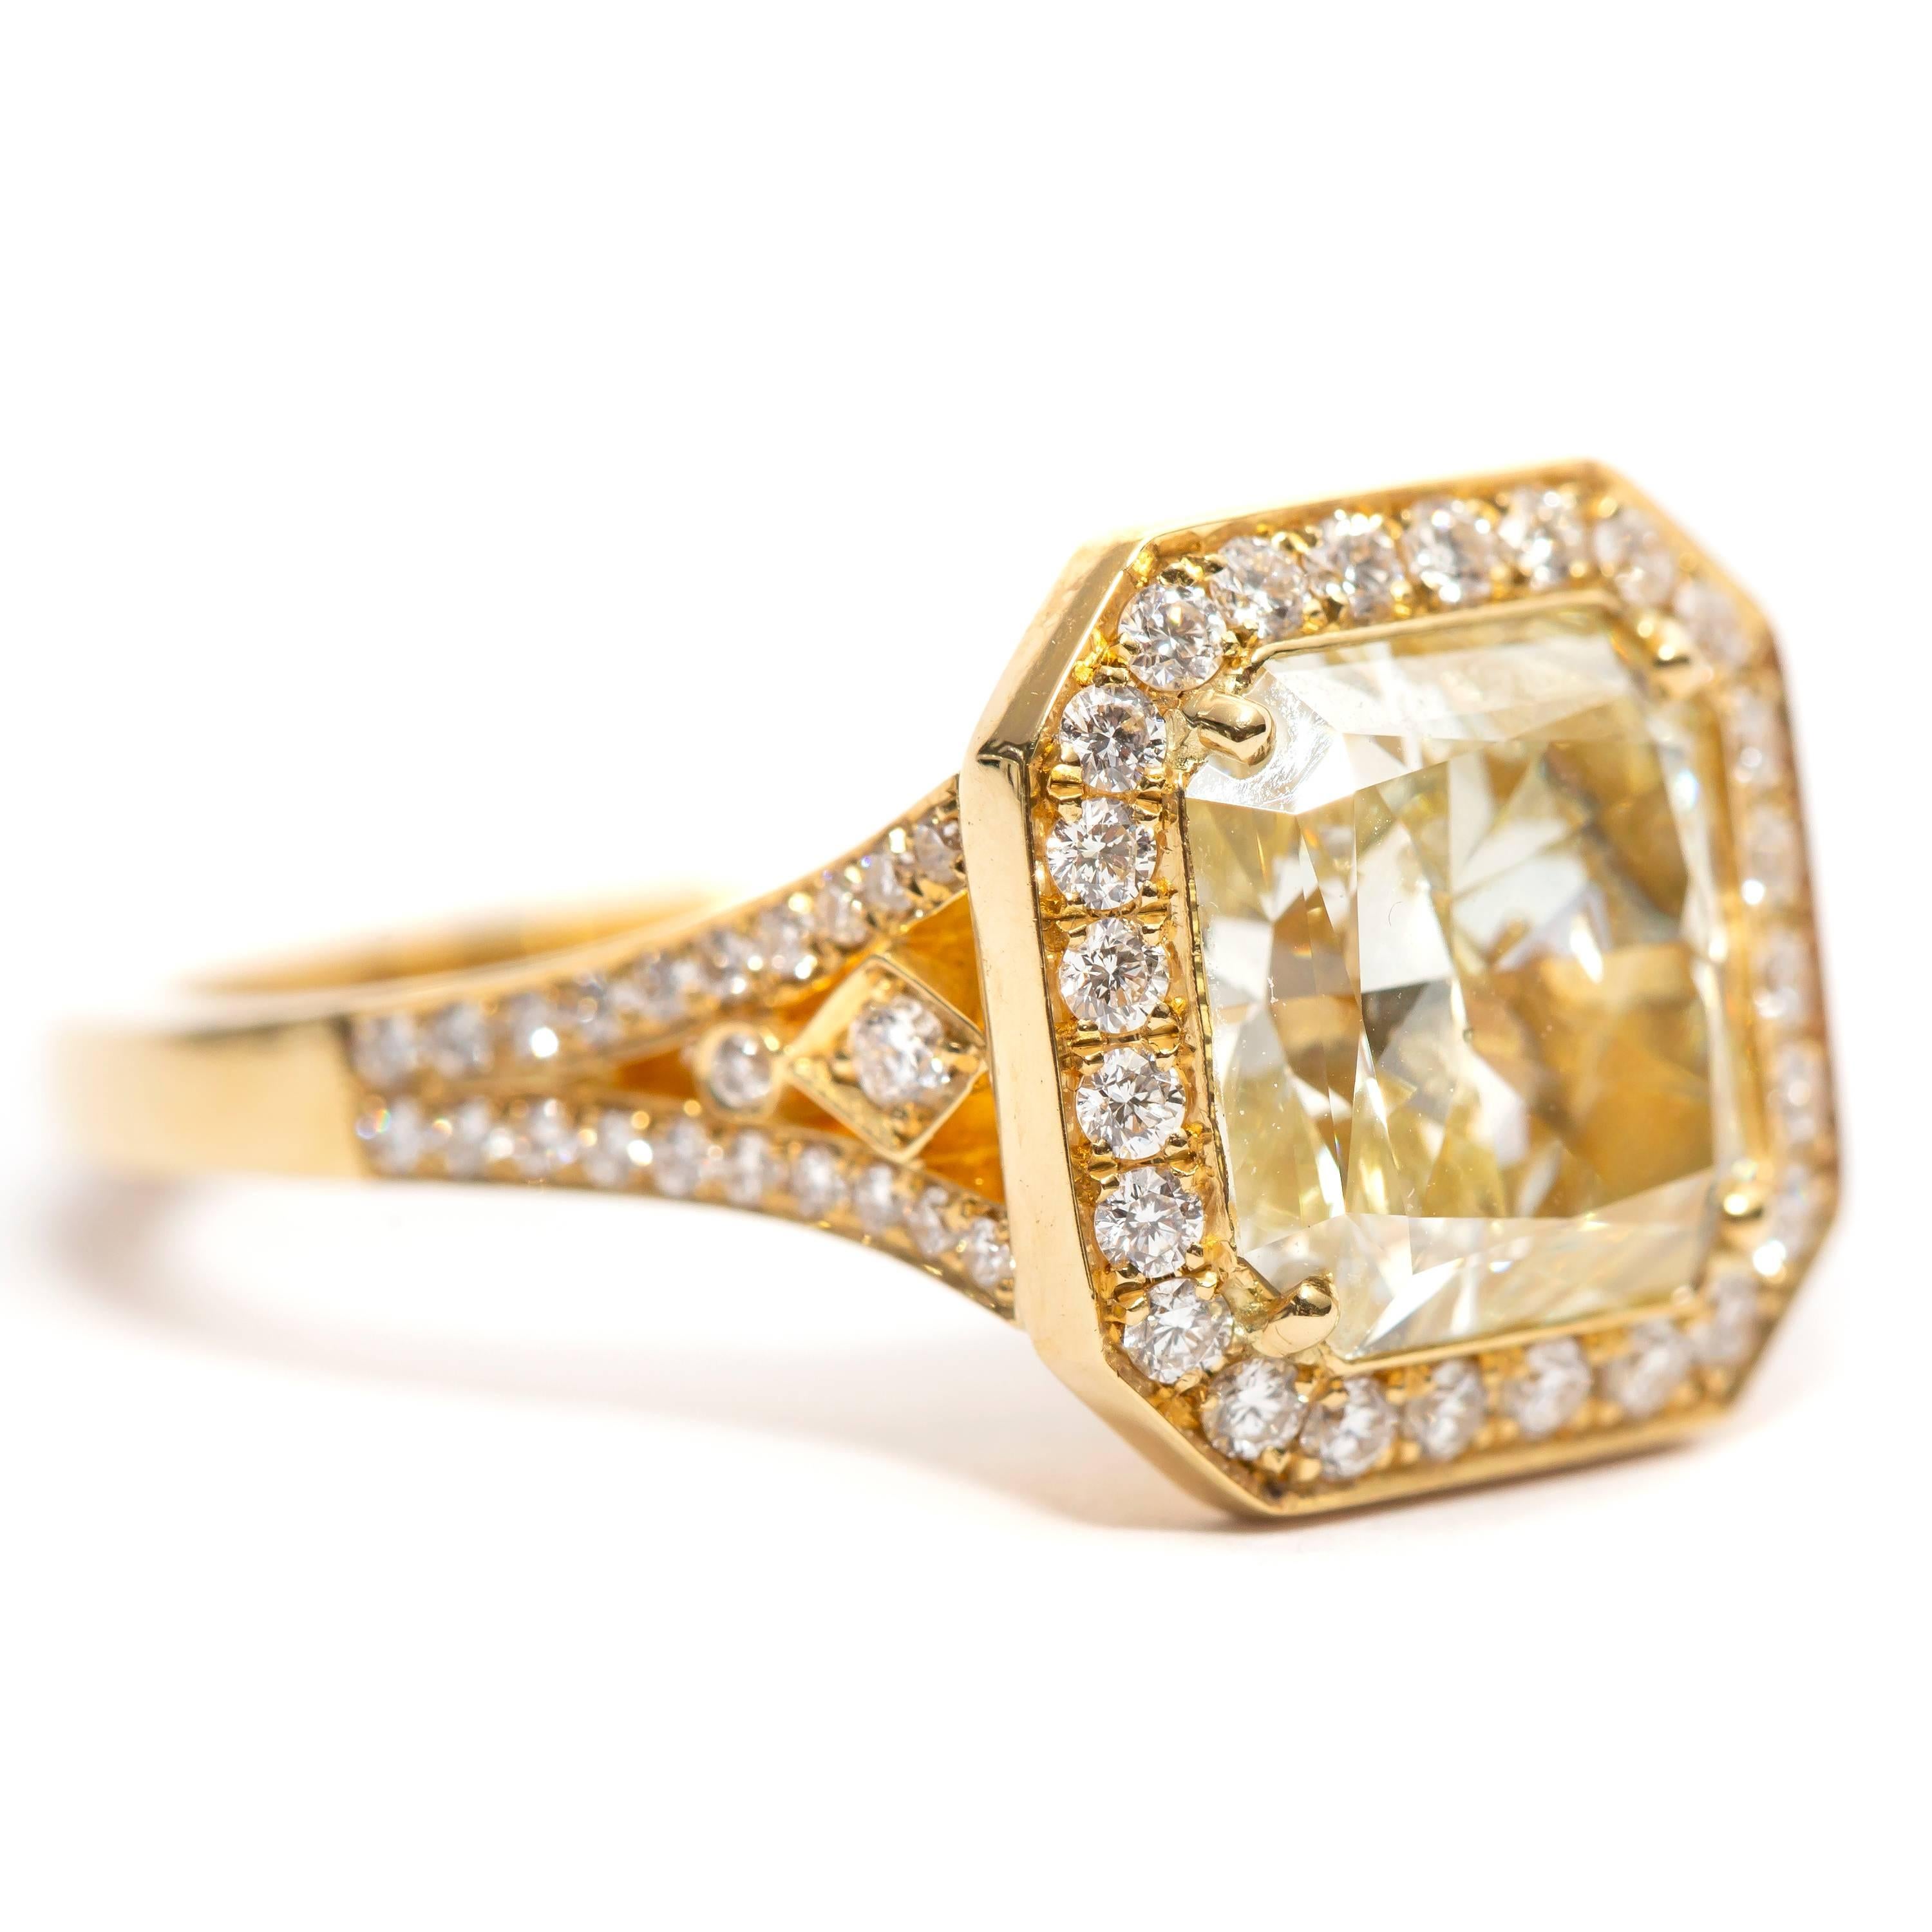 This Stunning 3.04 Carat Radiant Cut dazzling Diamond Engagement ring Color U-V Clarity SI2 featuring 0.43 Carat of White Round Brilliant Diamonds that flow down the sides of the shoulders White Color G/H Clarity SI1 set in 18 Karat Yellow Gold